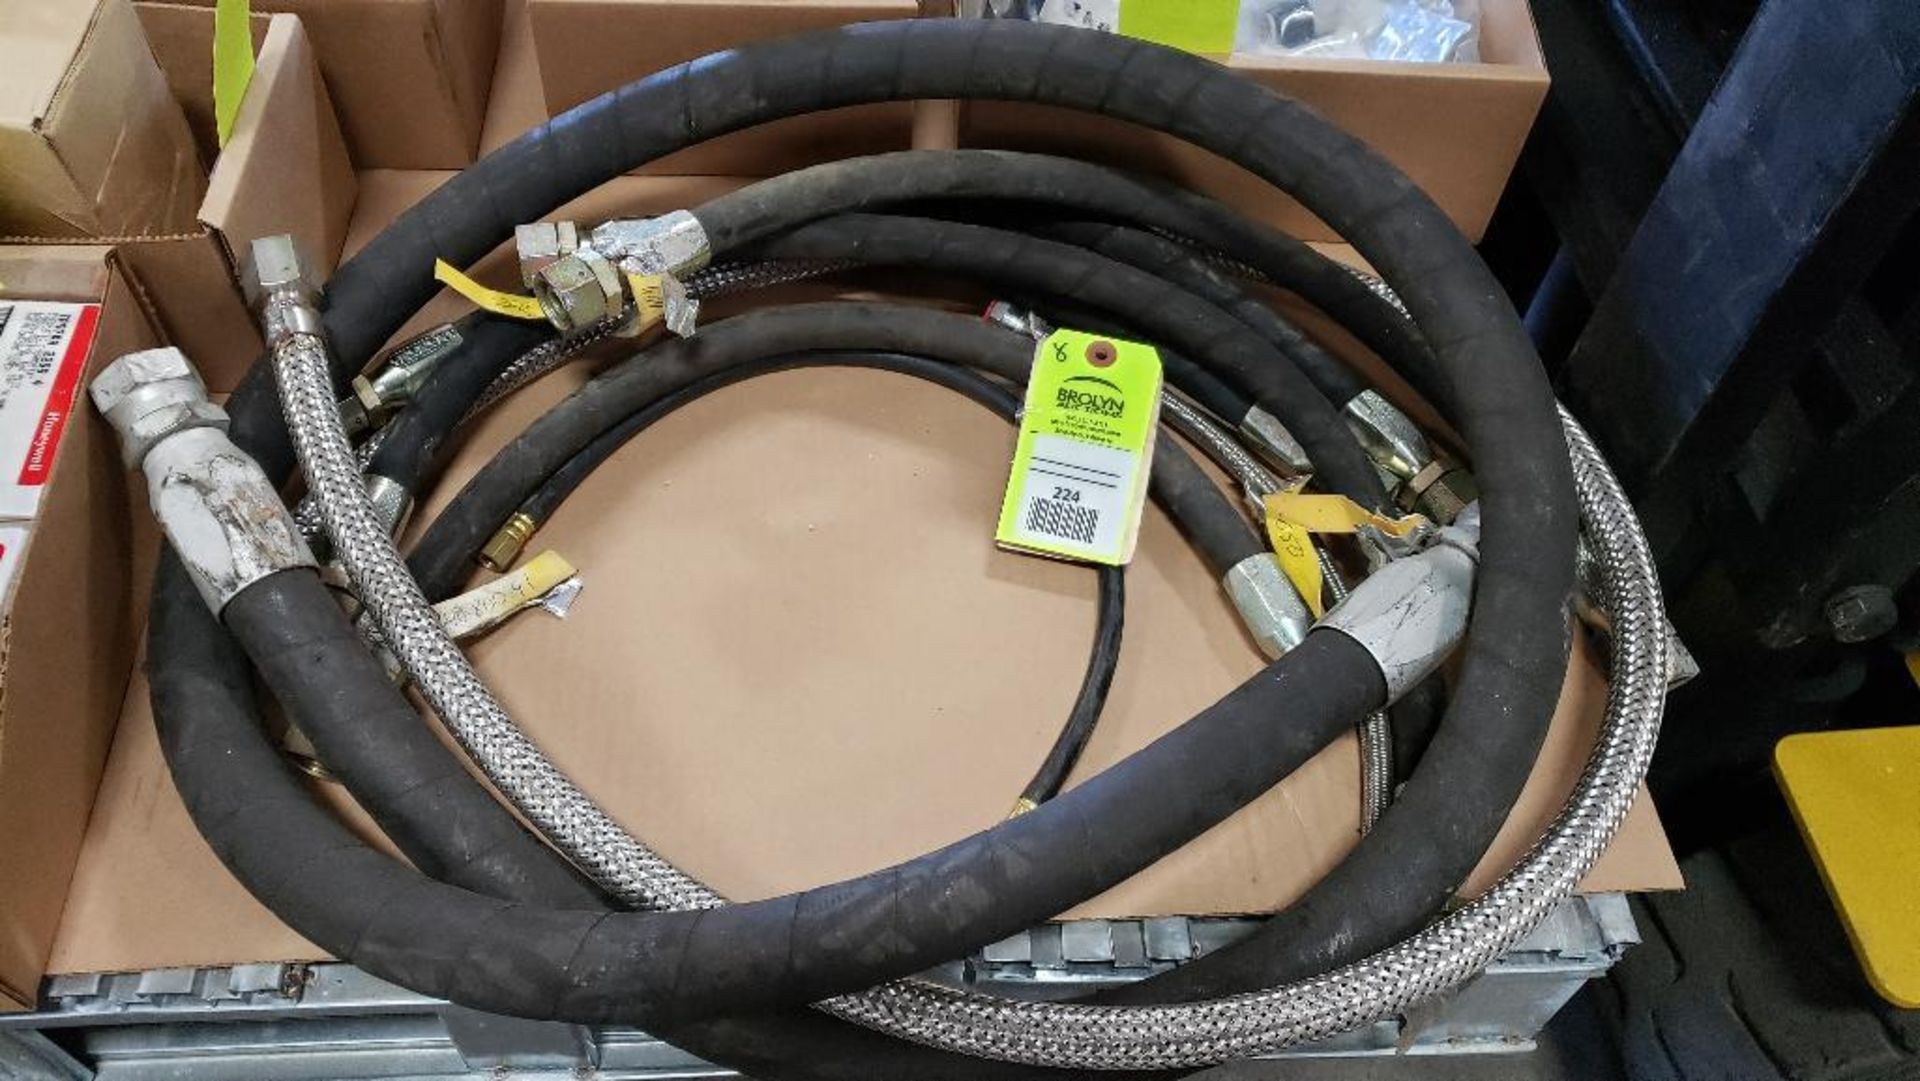 Lot of assorted high pressure hoses.